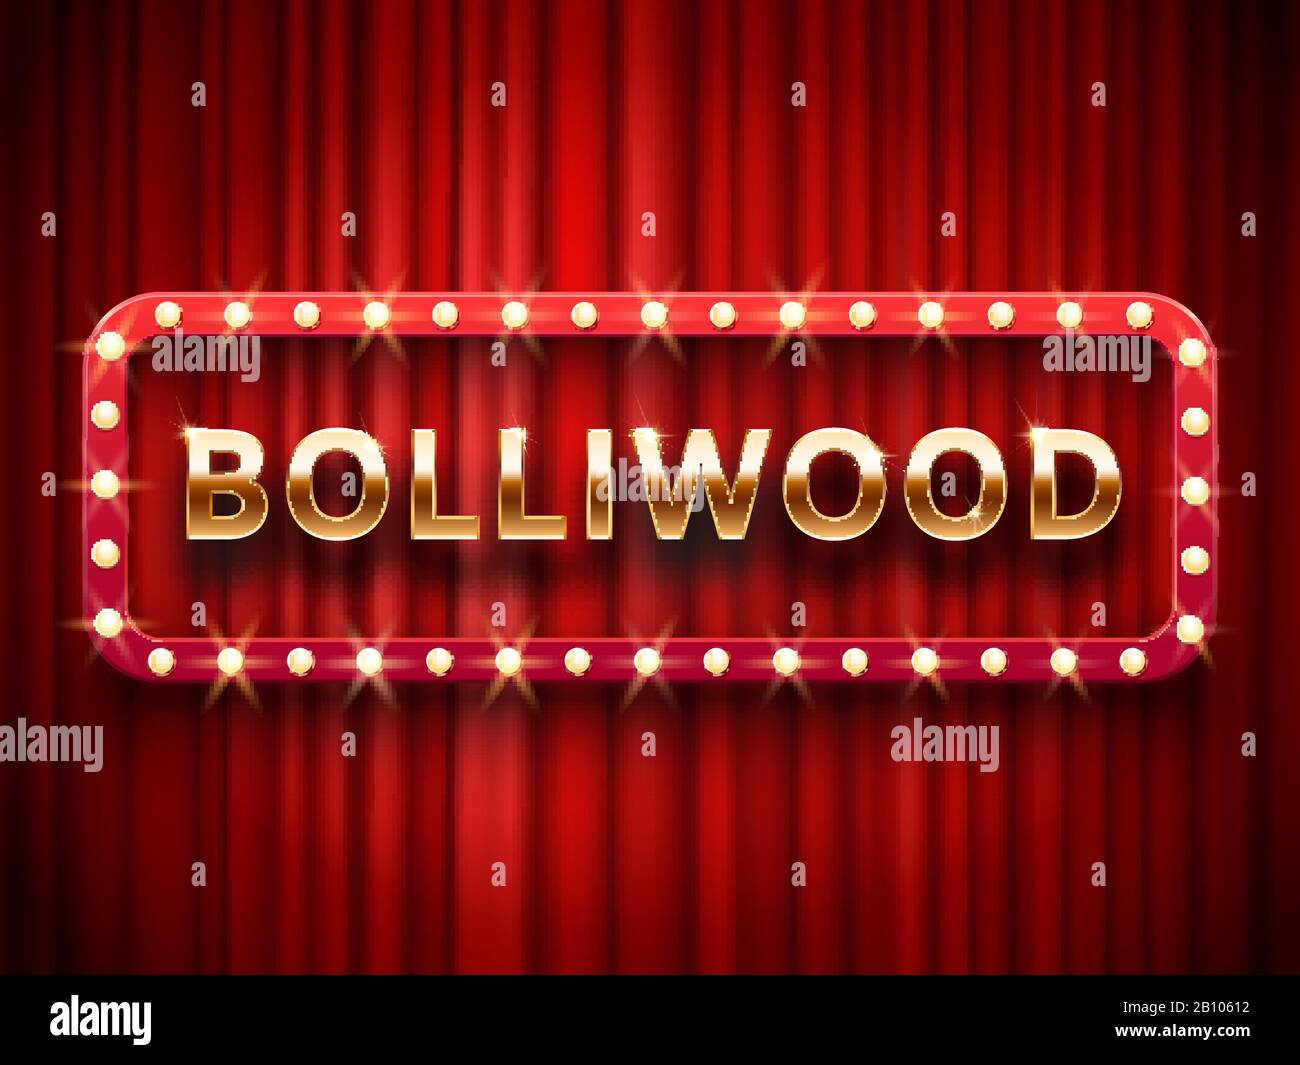 Bollywood cinema. Vintage indian movie, cinematography and theater poster. Retro 3d classic film posters logo on red curtains vector template Stock Vector